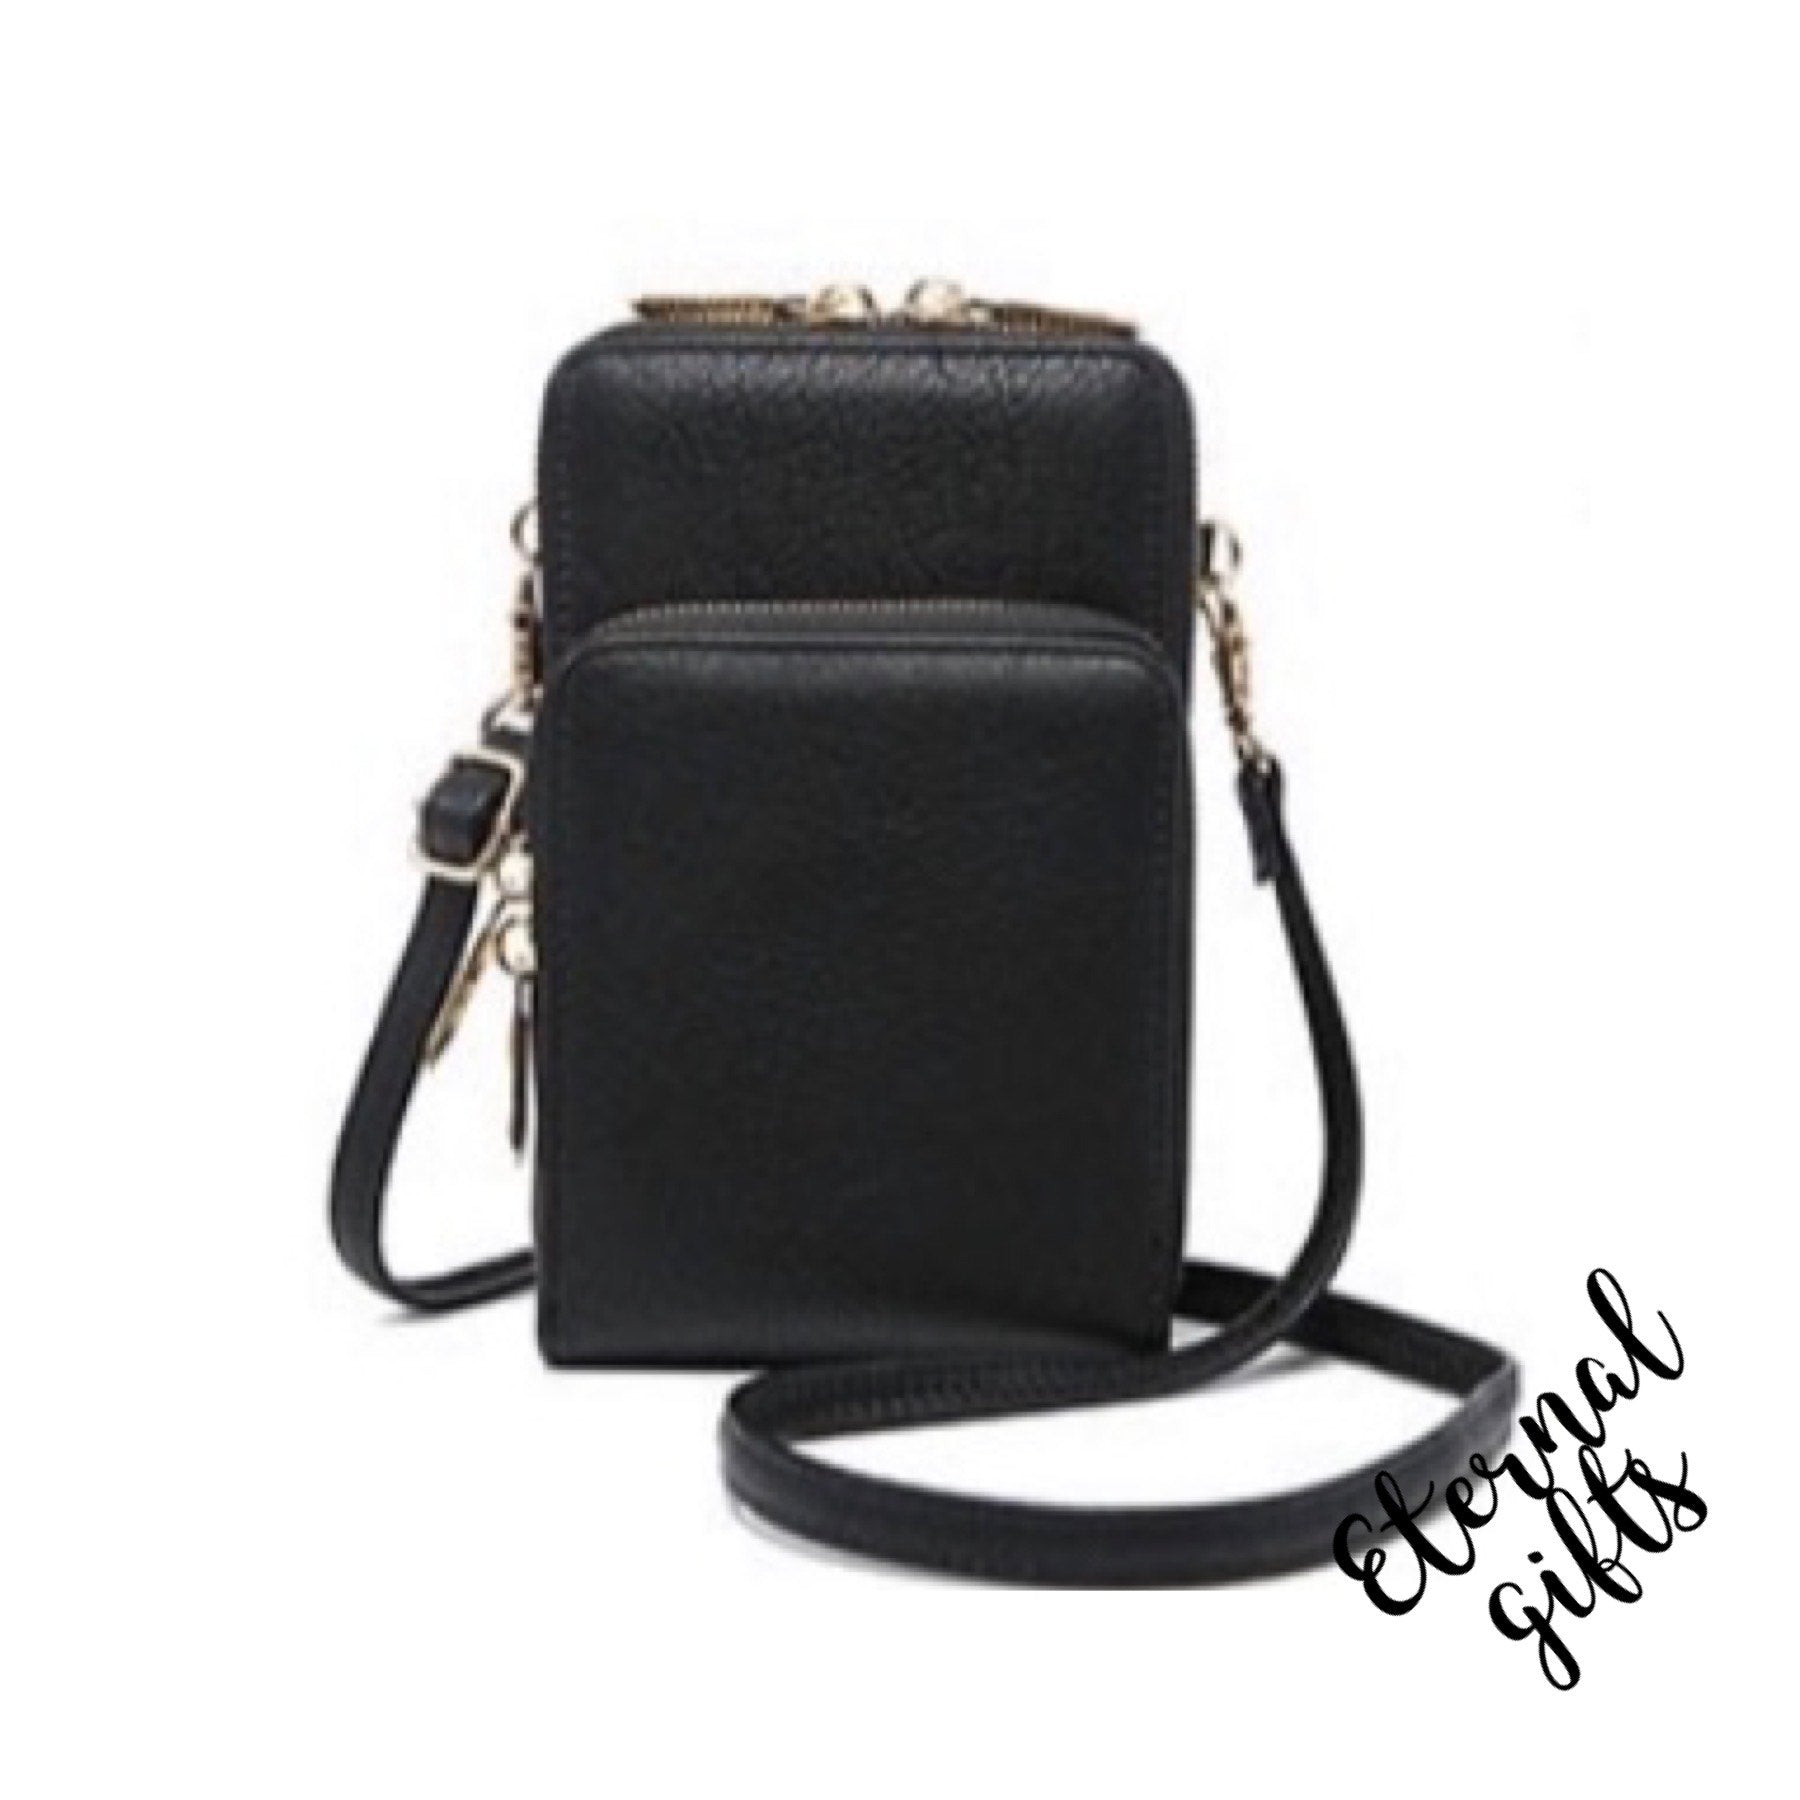 The Emmy Phone Pouch Crossover Bag in Black